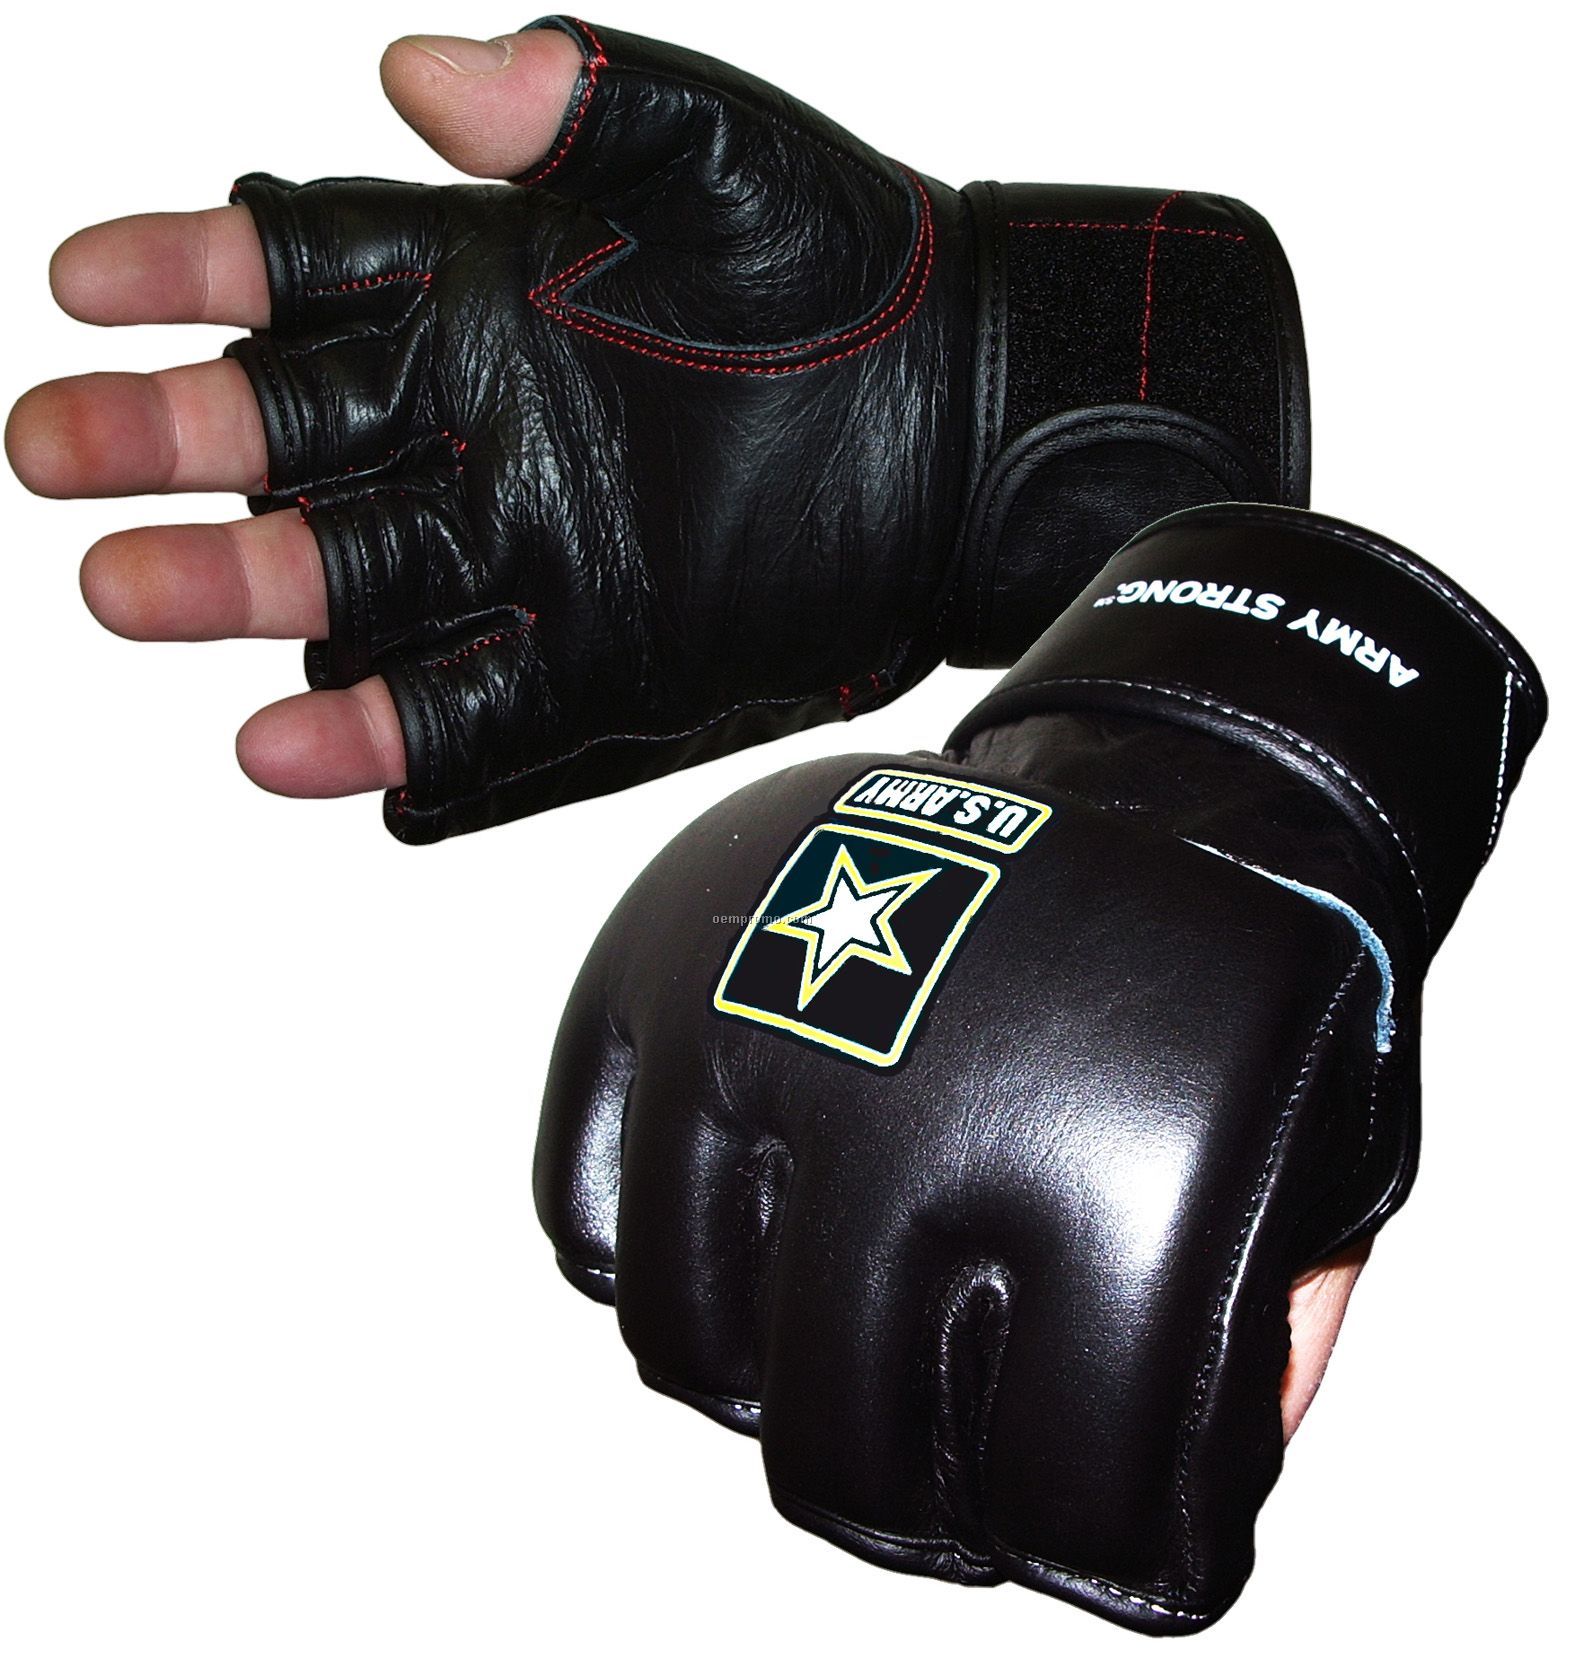 Mma Boxing Gloves, Genuine Leather, Closed Palm Version